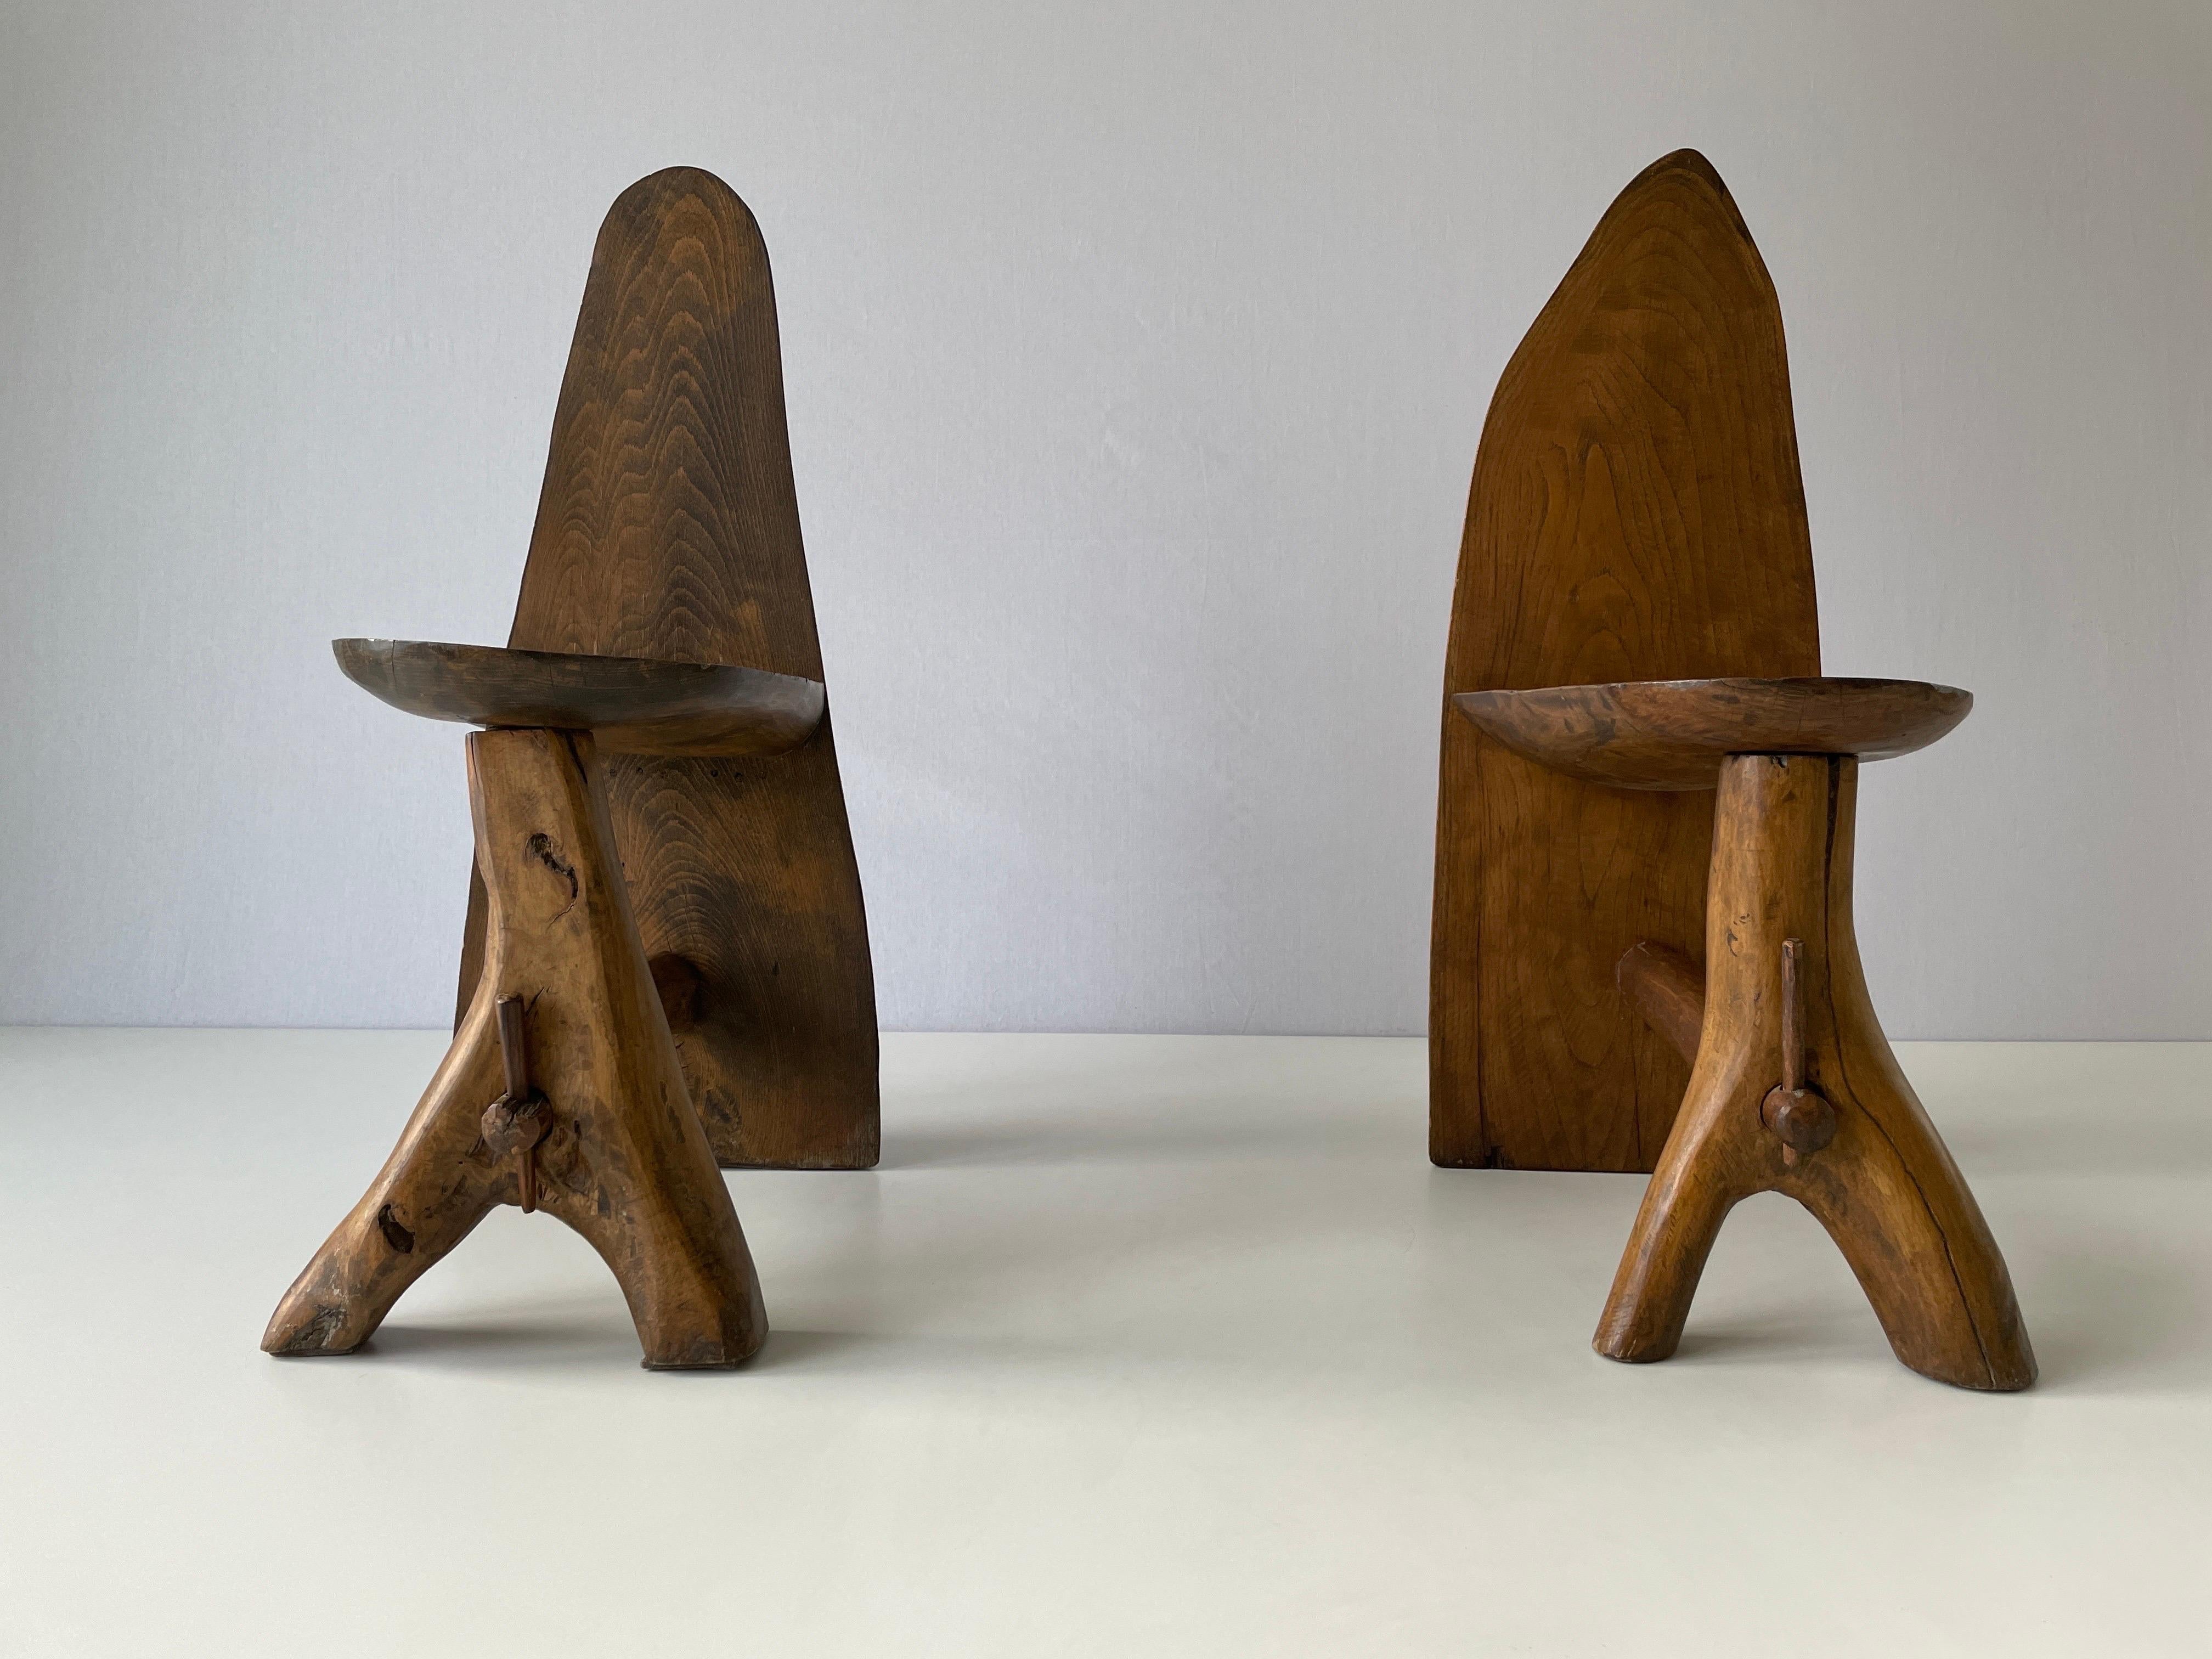 Hand-crafted Primitive Design Solid Wood Pair of Chairs, 1950s, Italy

Wear consistent with age and use.

Measurements: 
Height: 75 cm
Width: 27 cm
Depth: 47 cm
Seat height: 37 cm